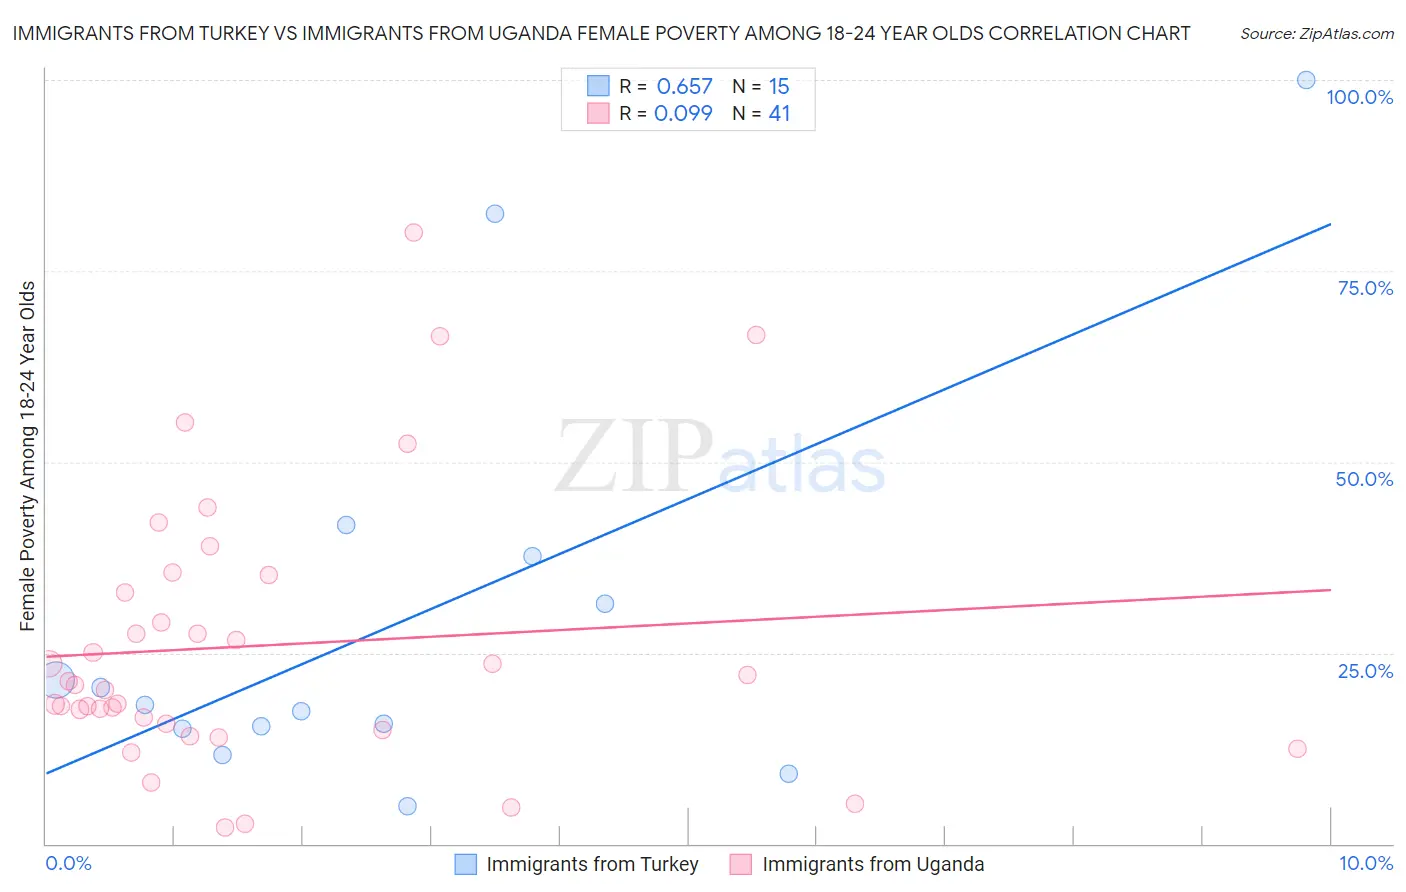 Immigrants from Turkey vs Immigrants from Uganda Female Poverty Among 18-24 Year Olds